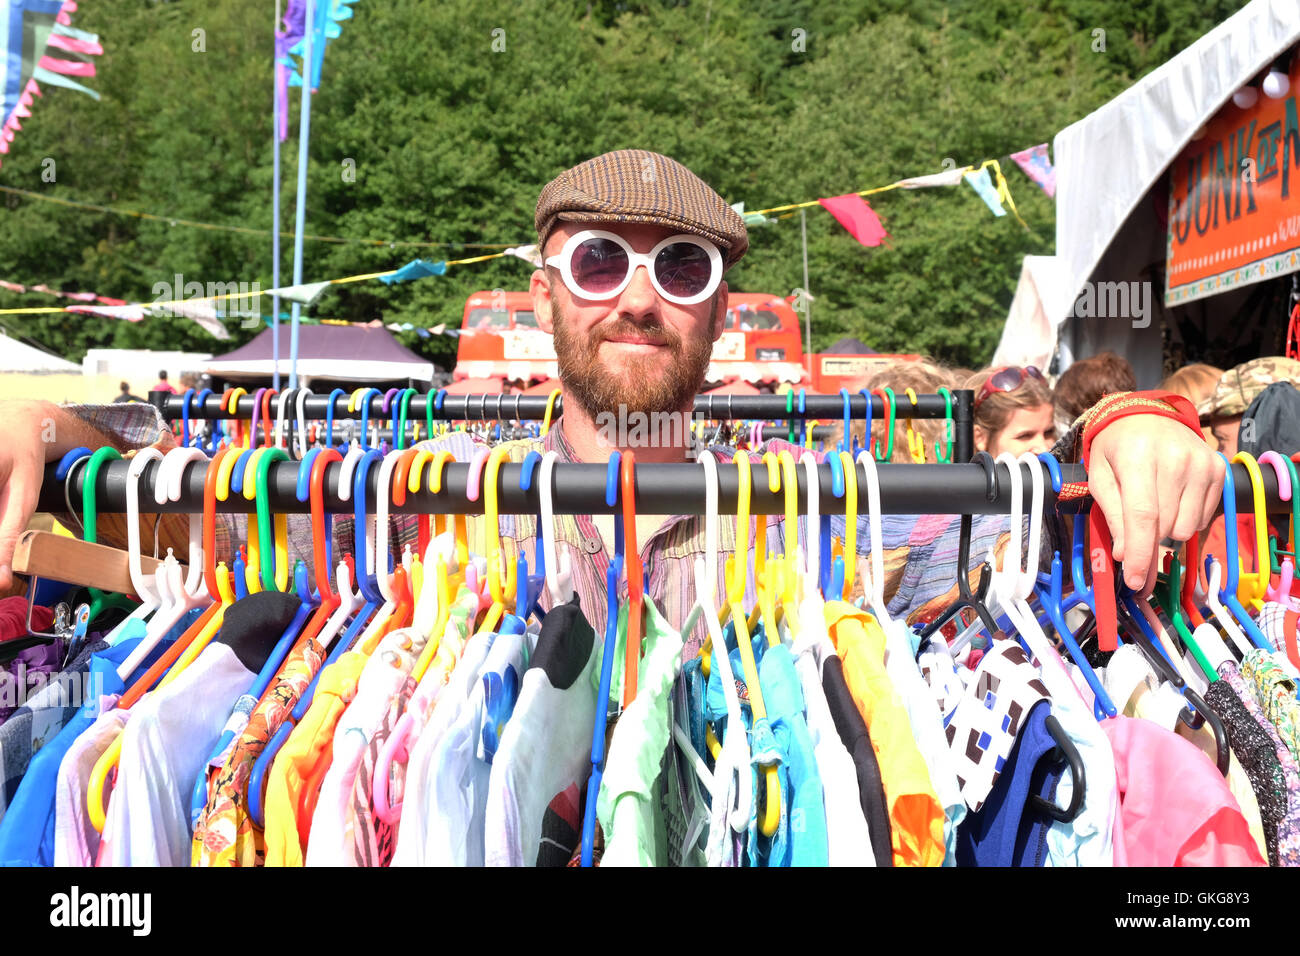 Green Man Festival, Crickhowell, Wales  - August 2016 - Clothes vendor 'Junk of Manchester' poses at the Green Man Festival with his merchandise. Stock Photo